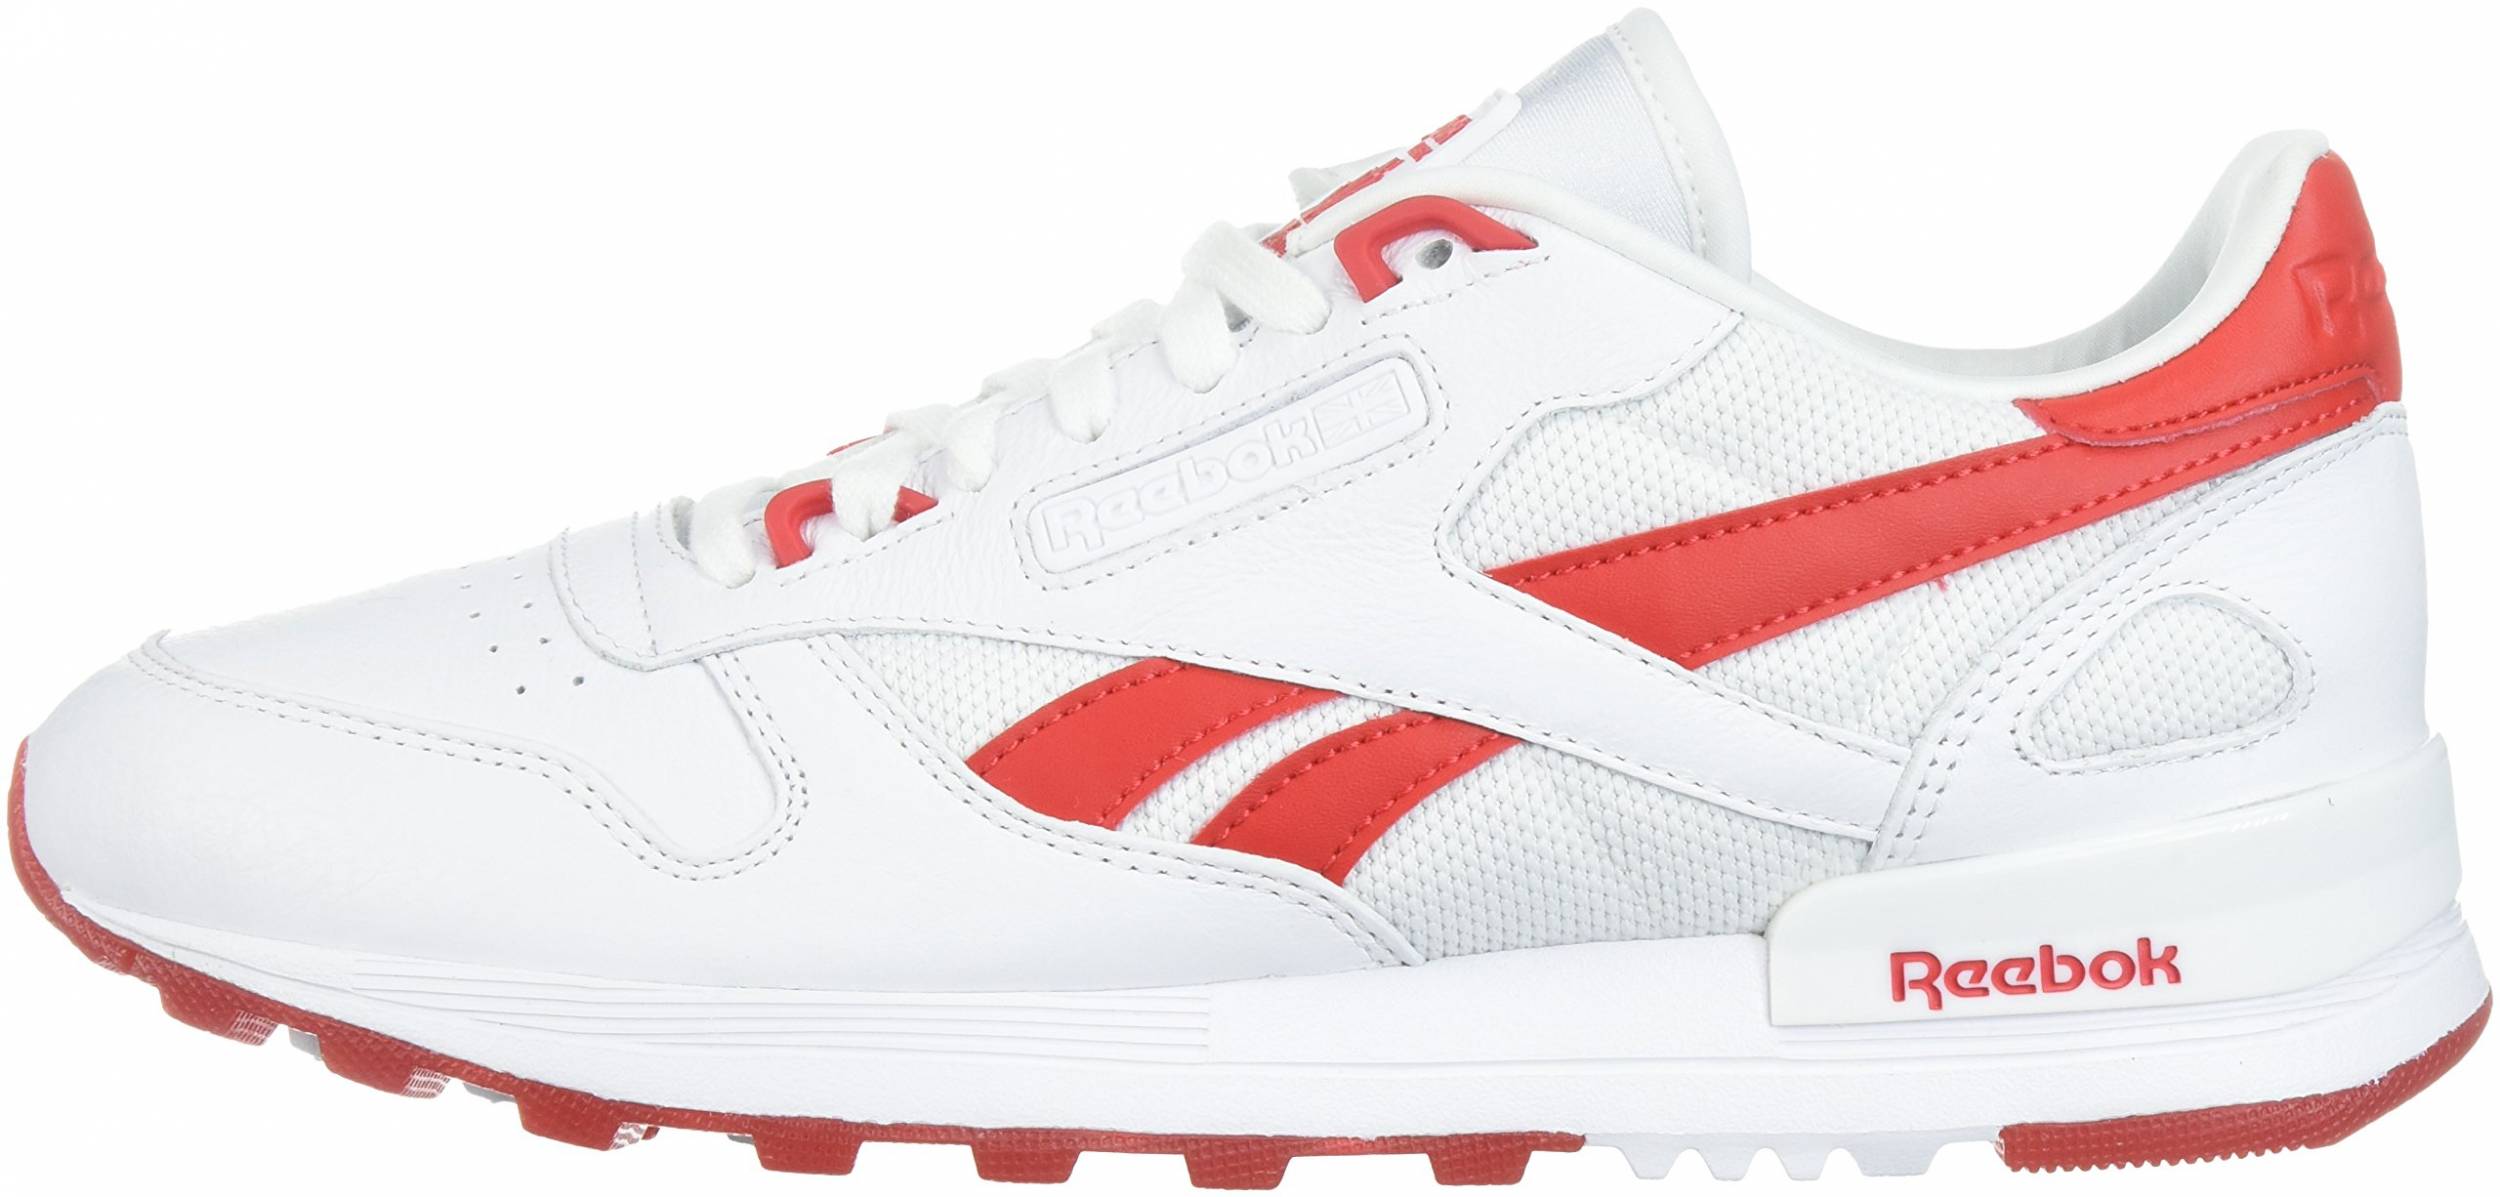 reebok classic leather speckled red